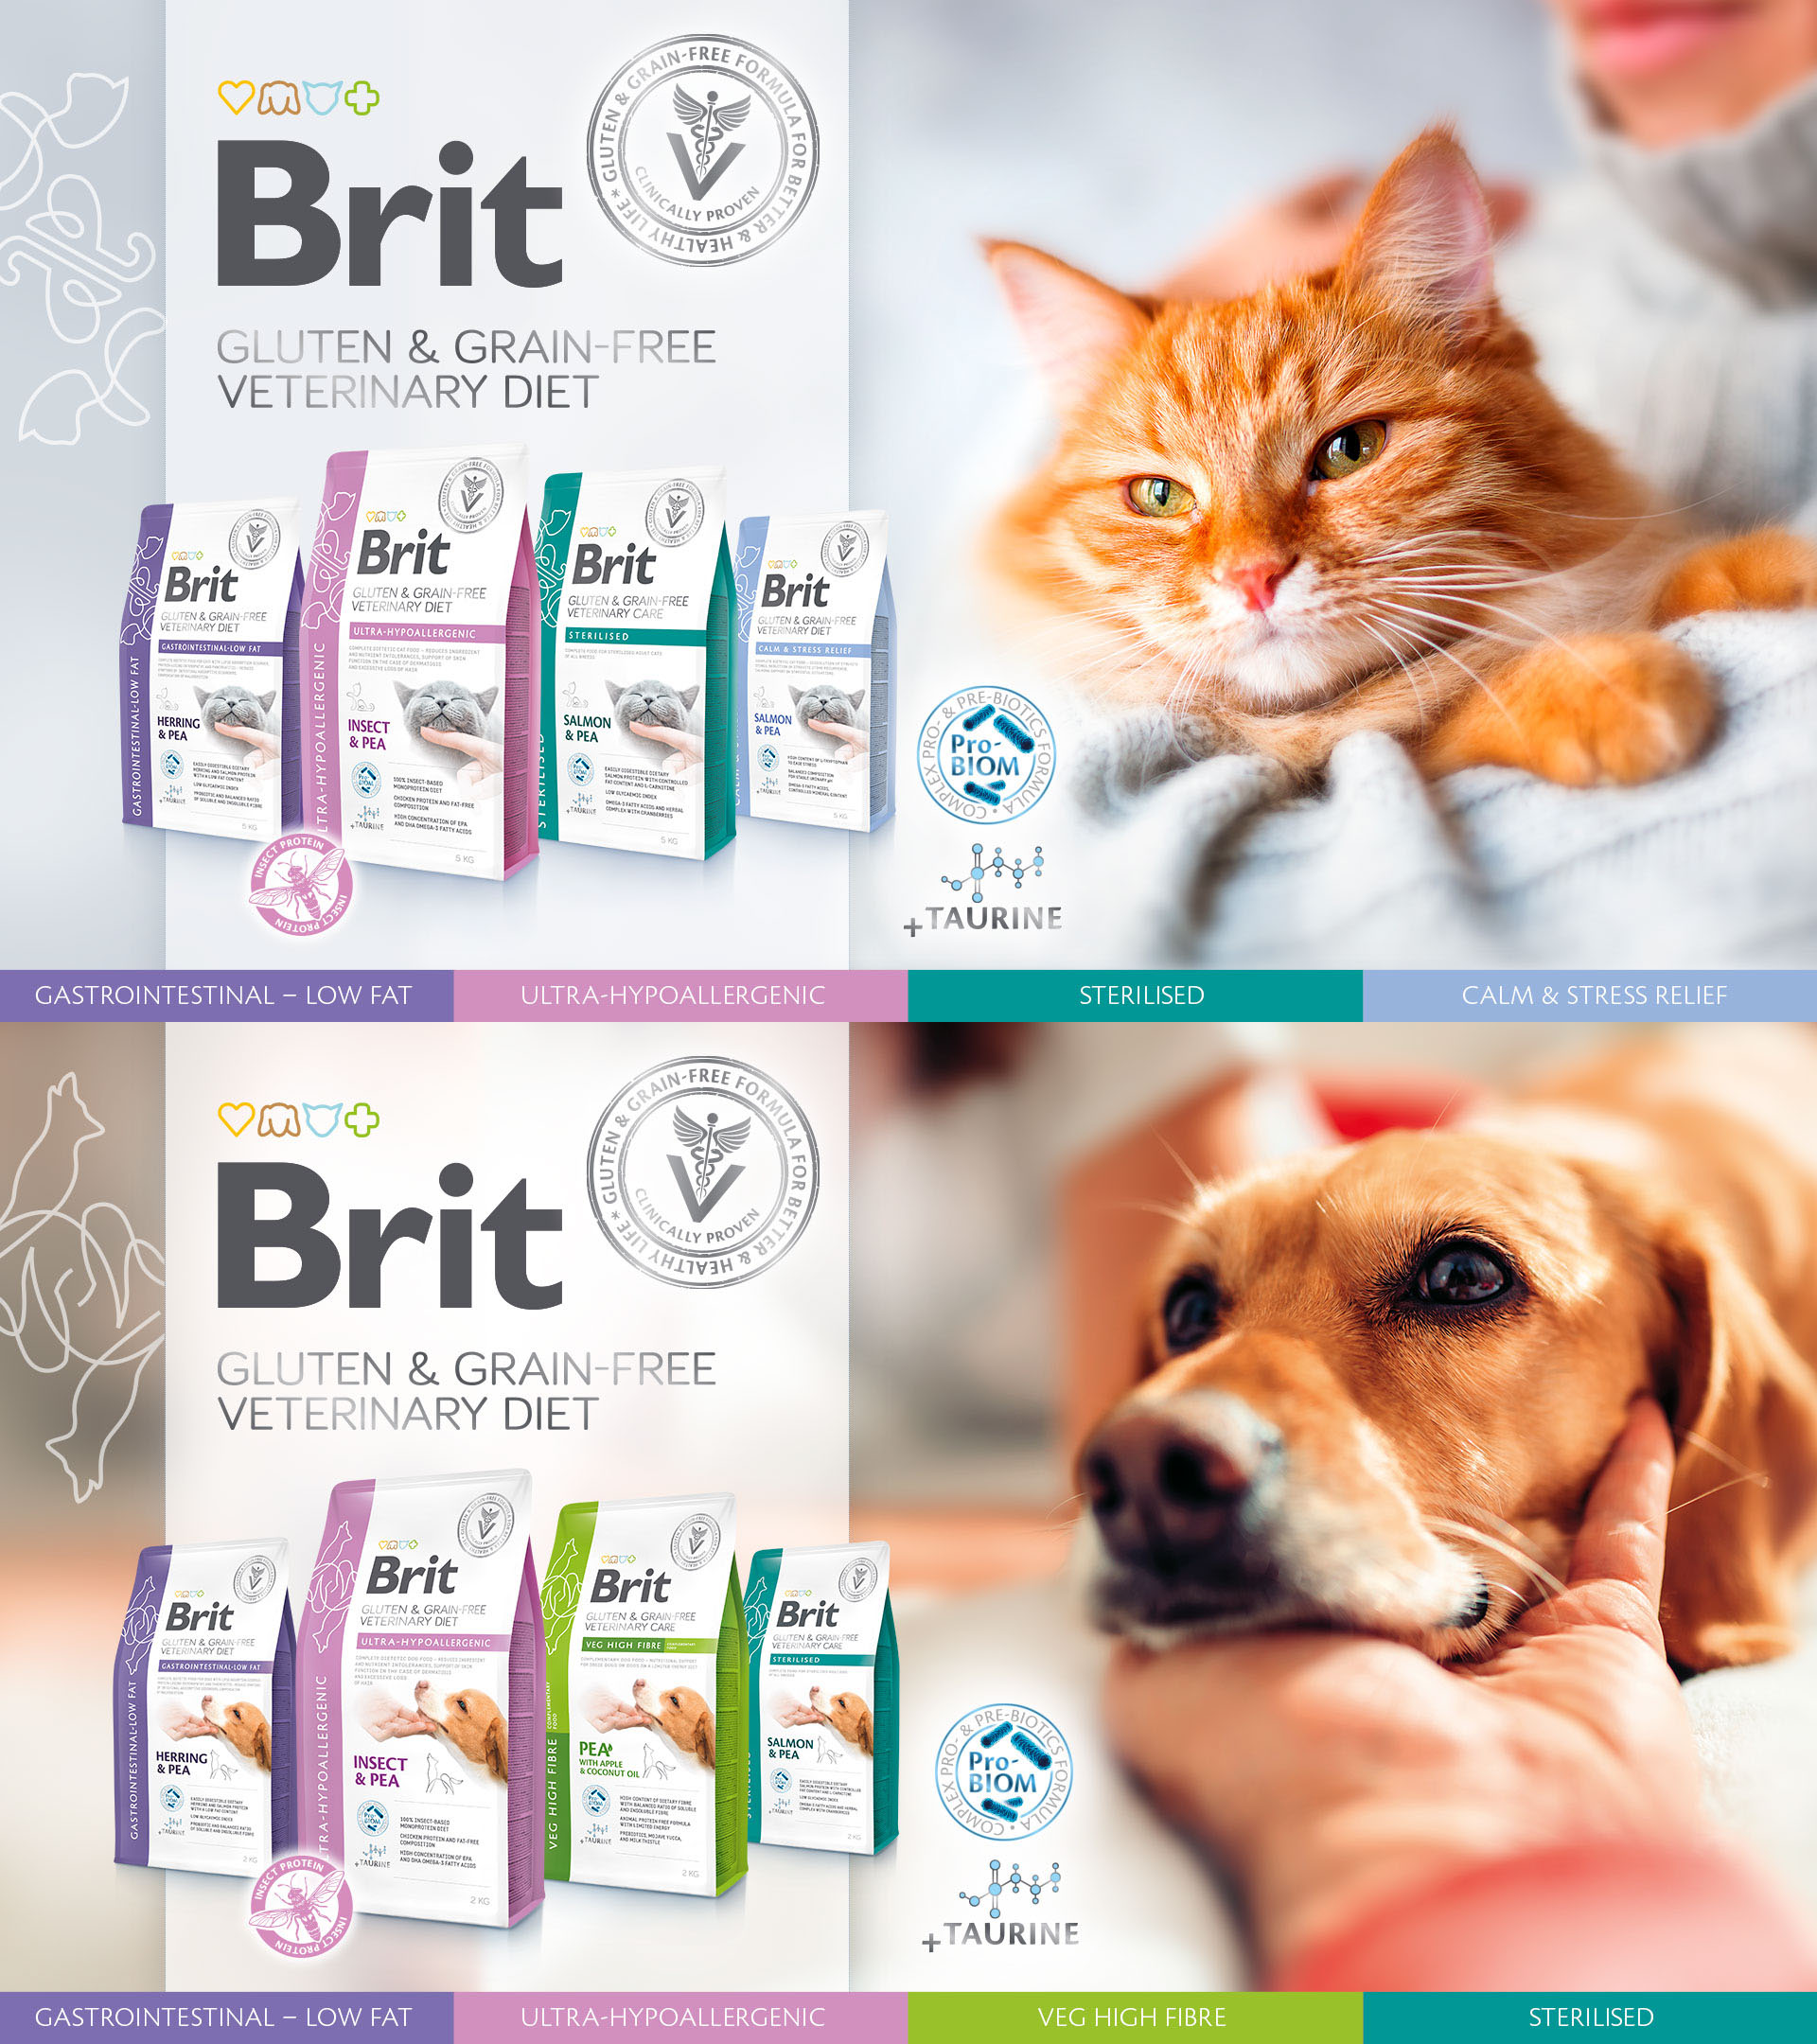 The expanded offerings in VAFO's Brit Veterinary Diet line